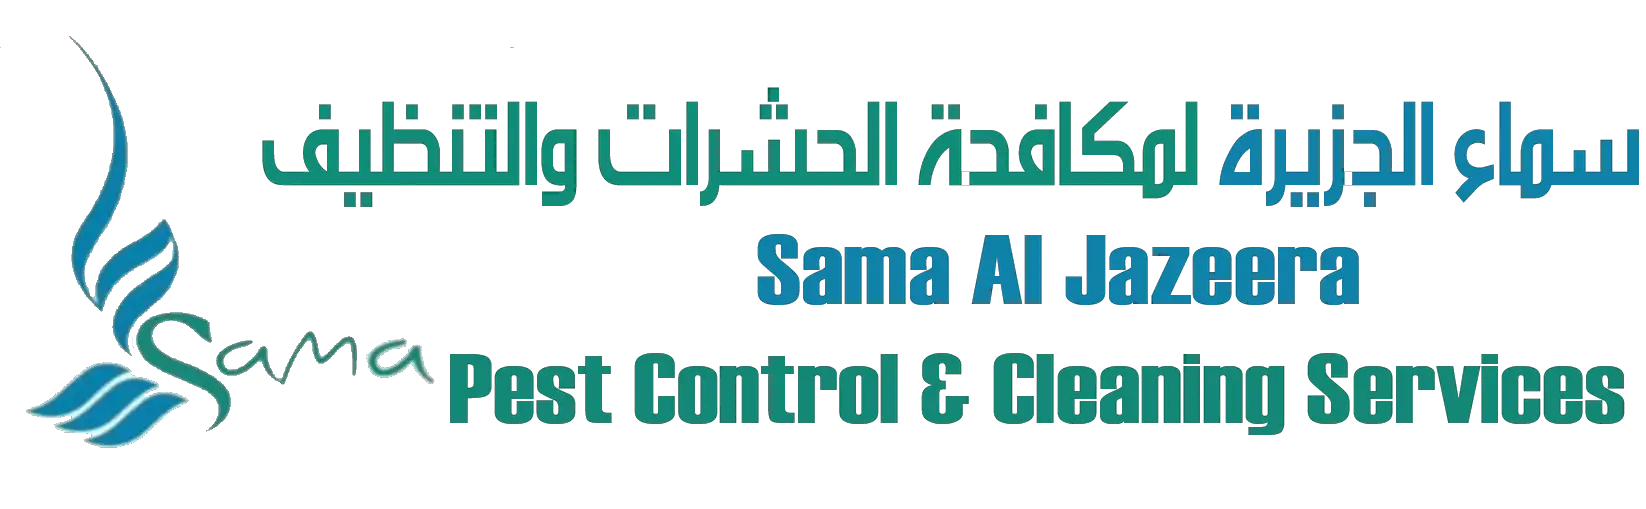 Sama Pest Control & Cleaning Services